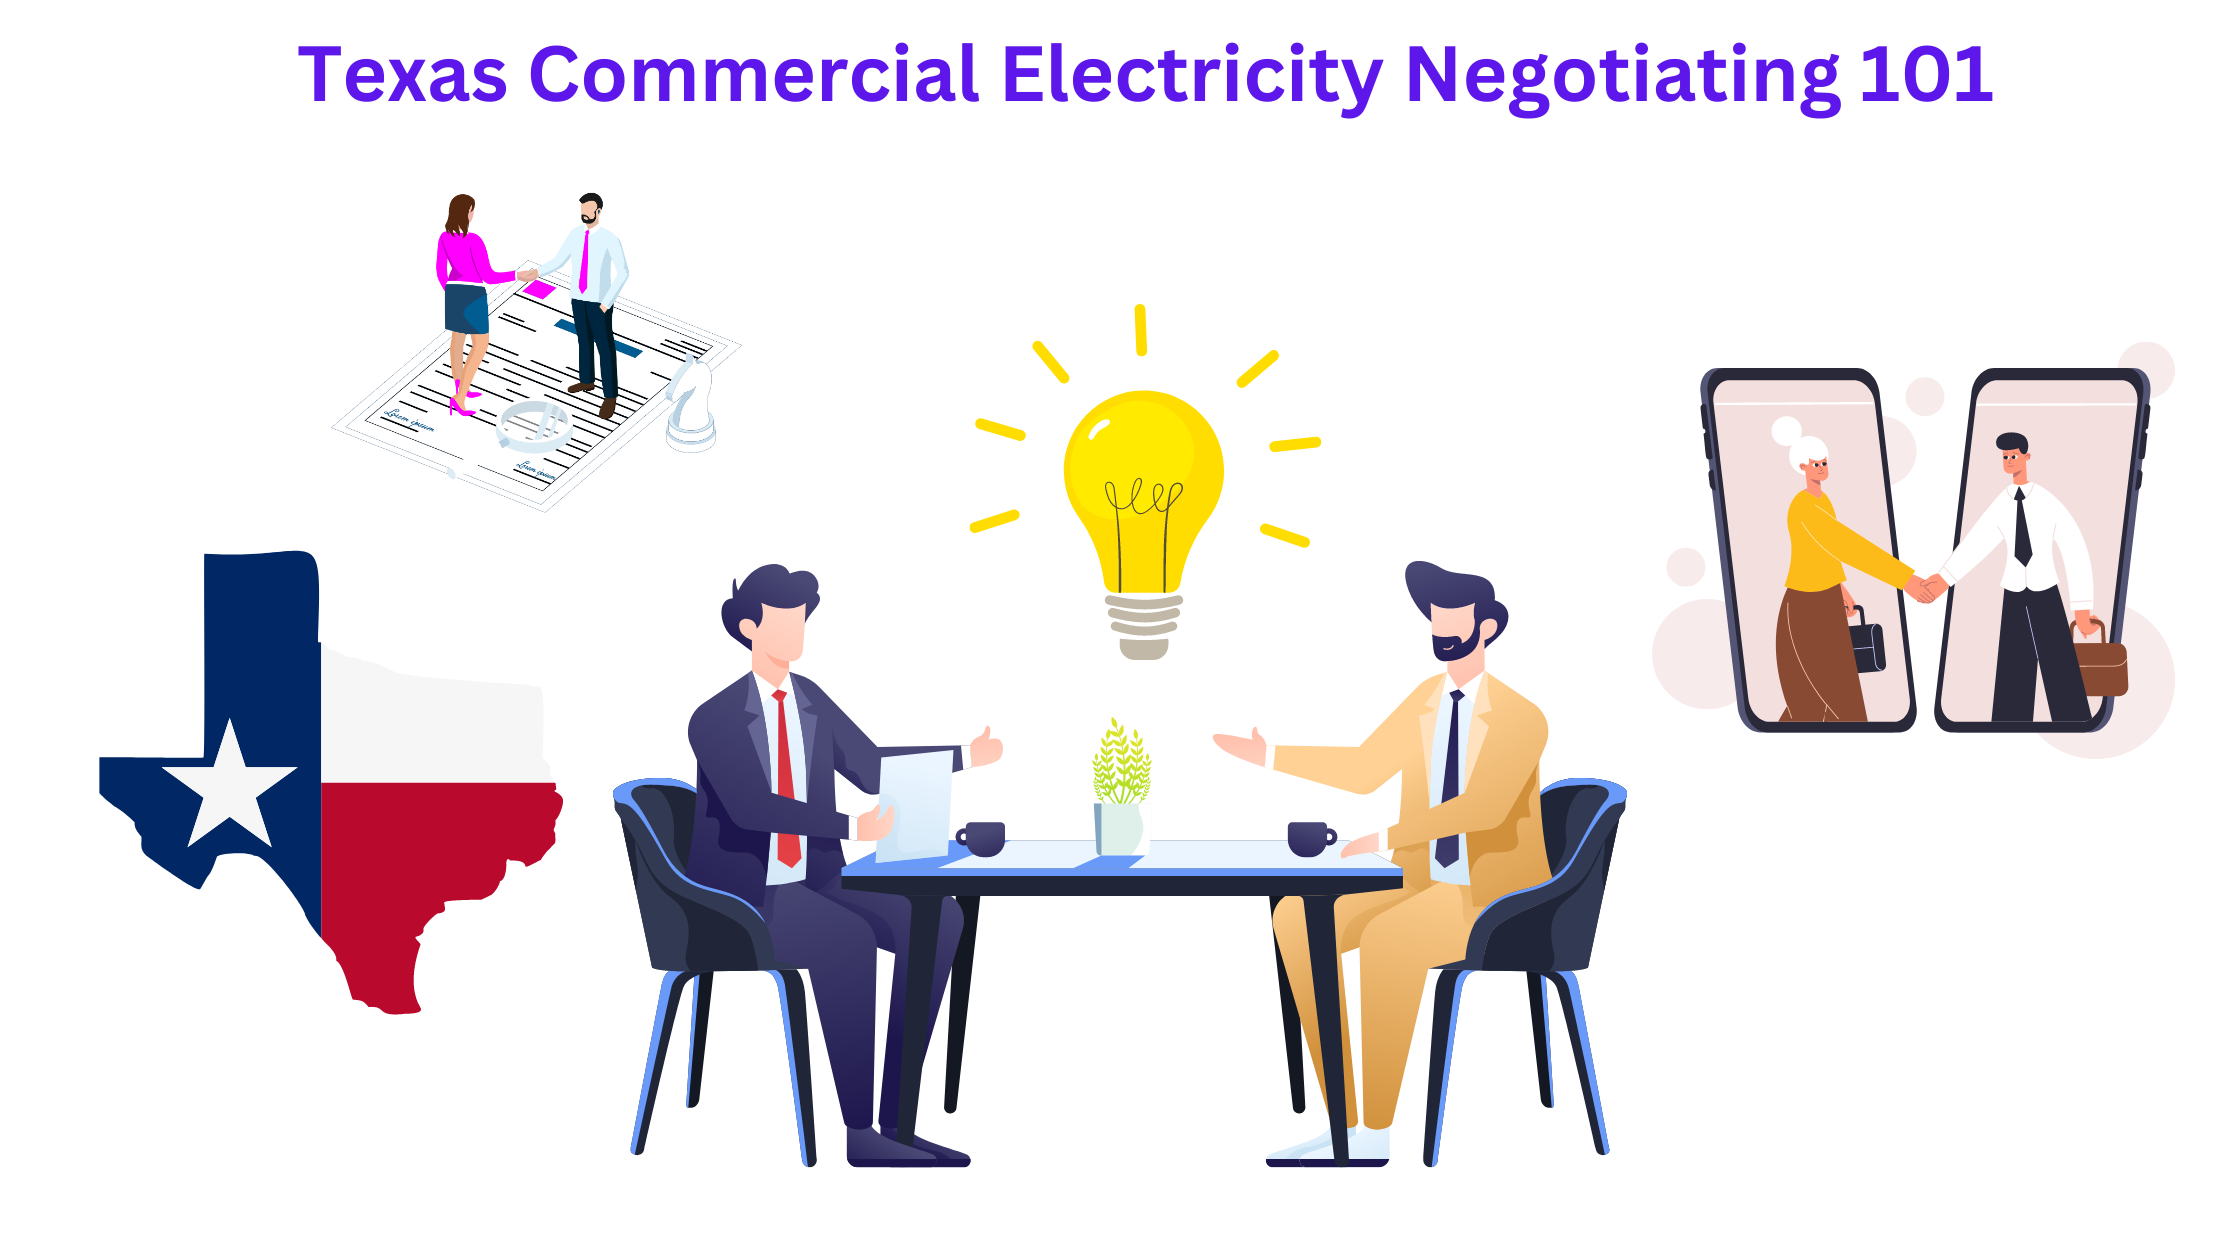 Business people negotiating a commercial electricity rate contract in Texas